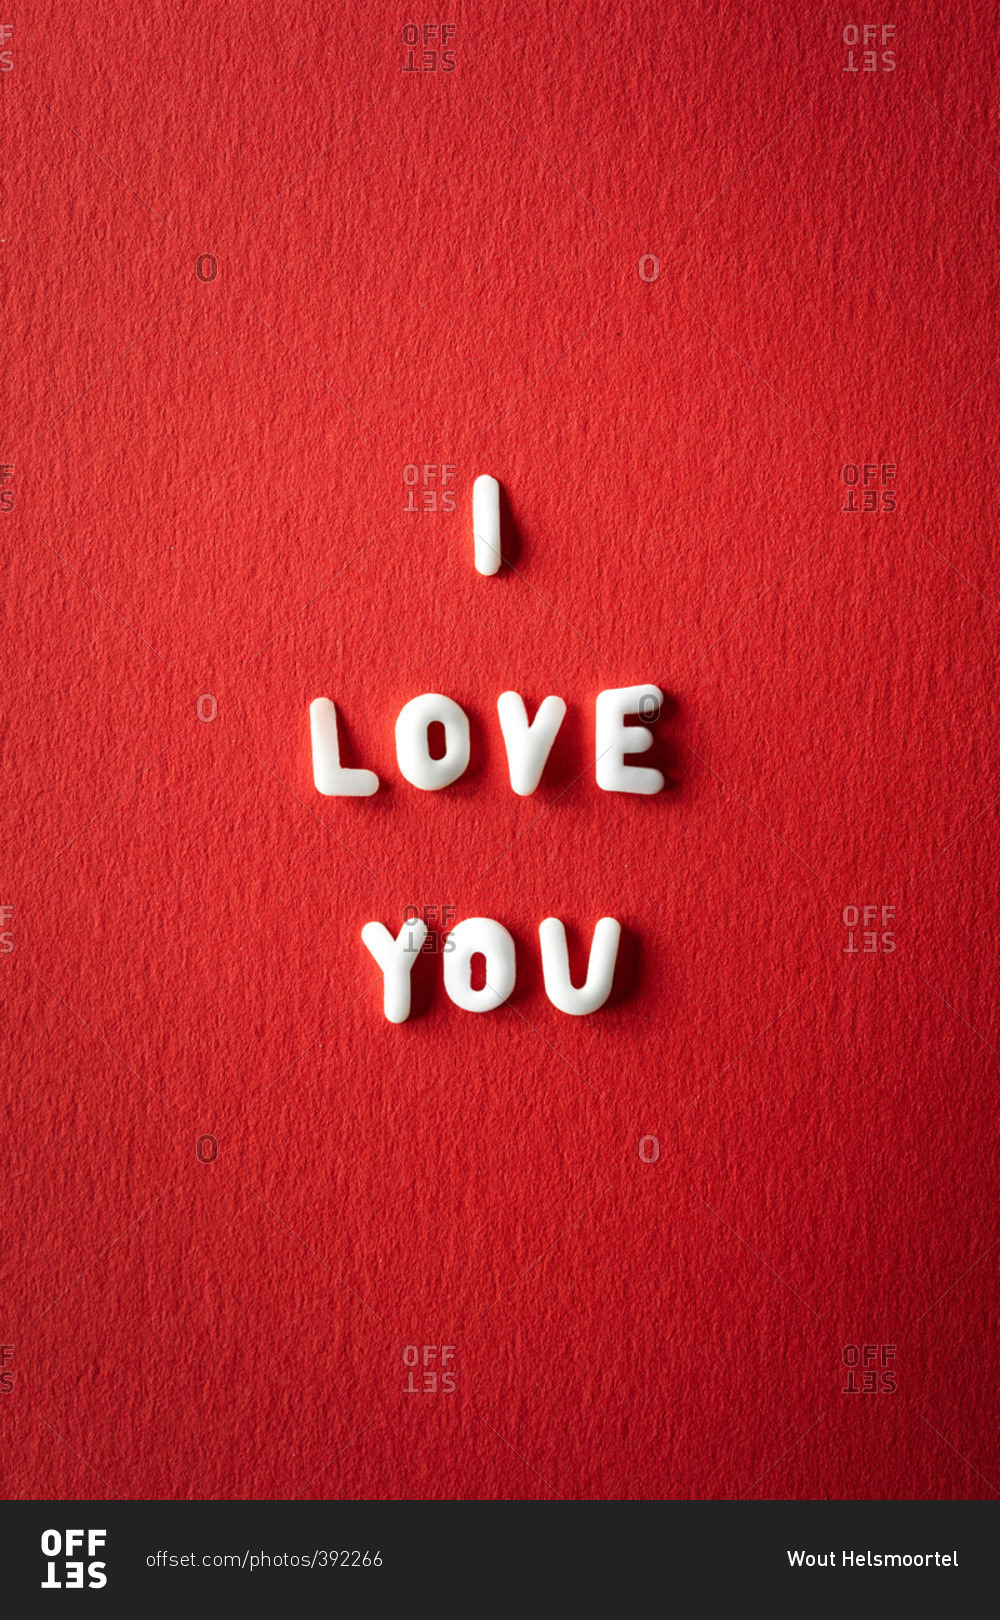 I love you on red background